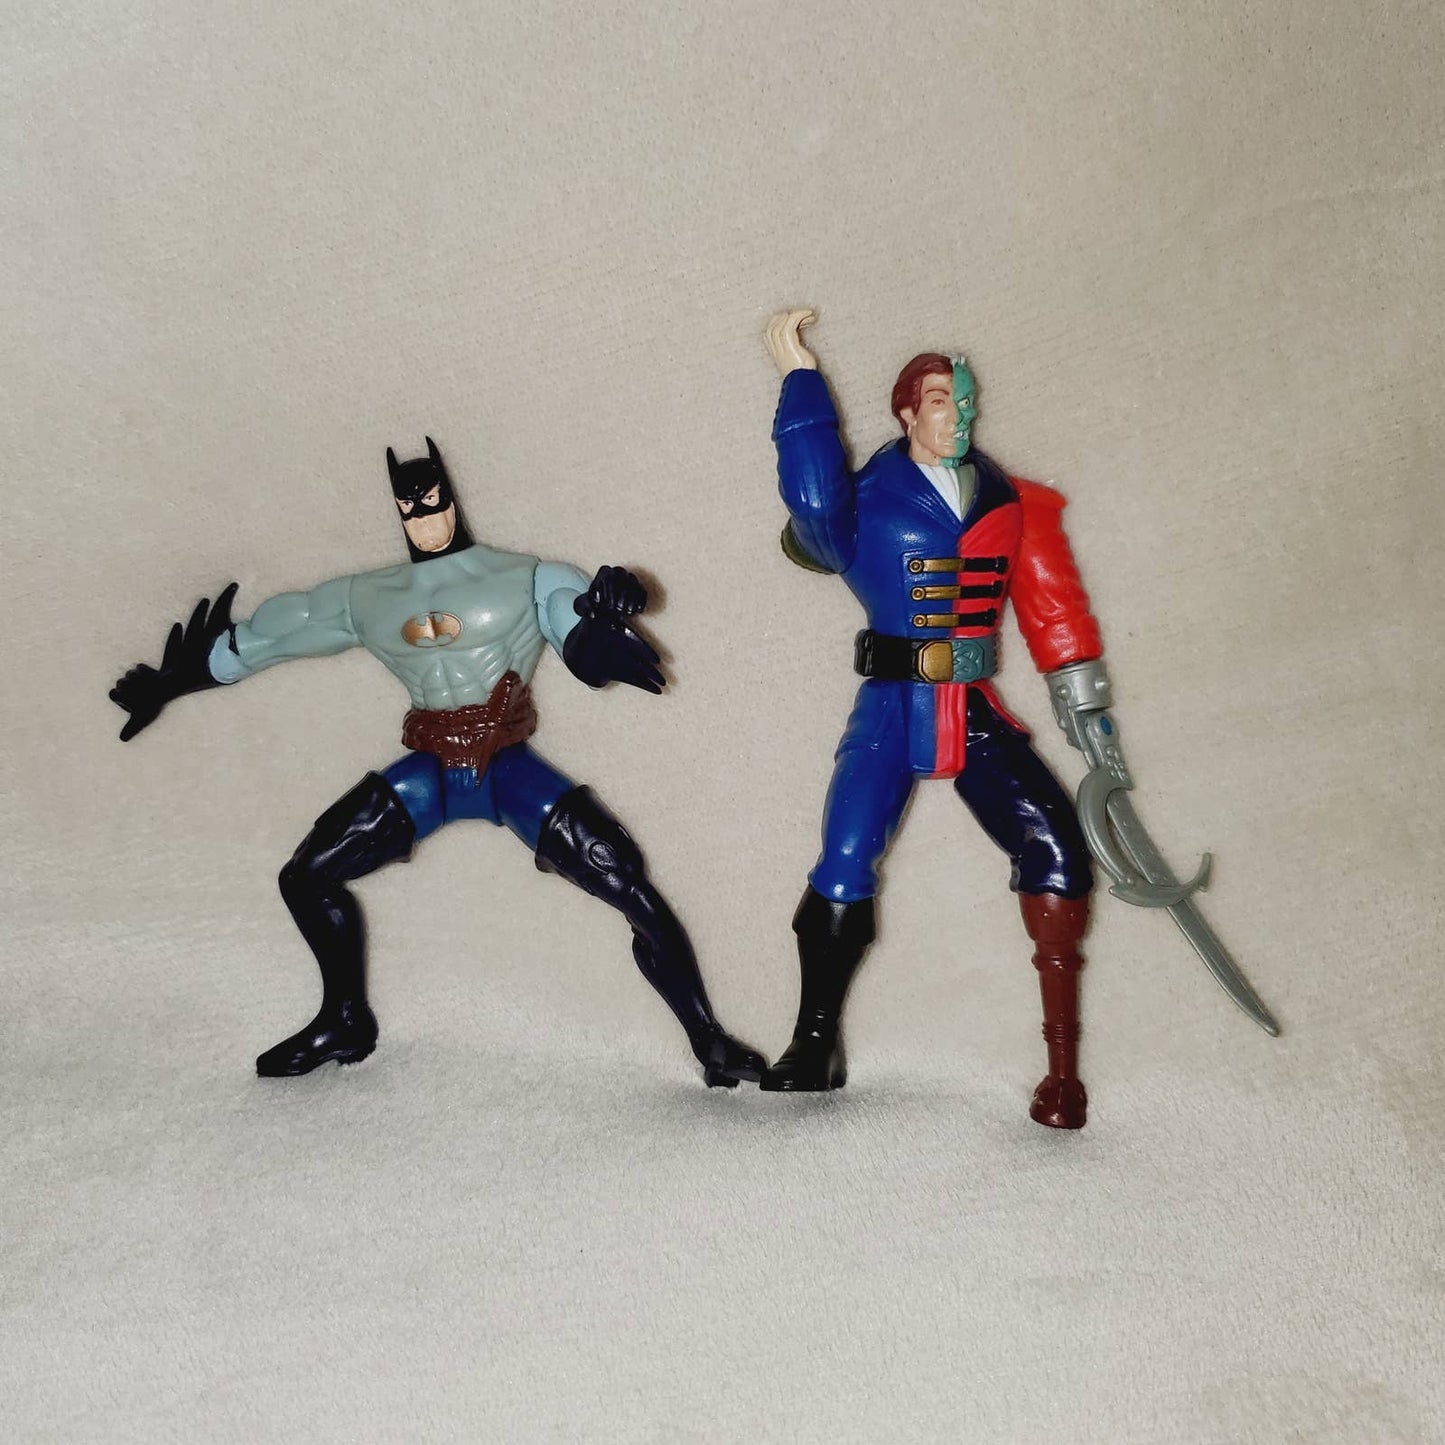 '94 Vintage Twisted Arm Kenner Toys Legends of Batman: Pirate Batman & Two-Face